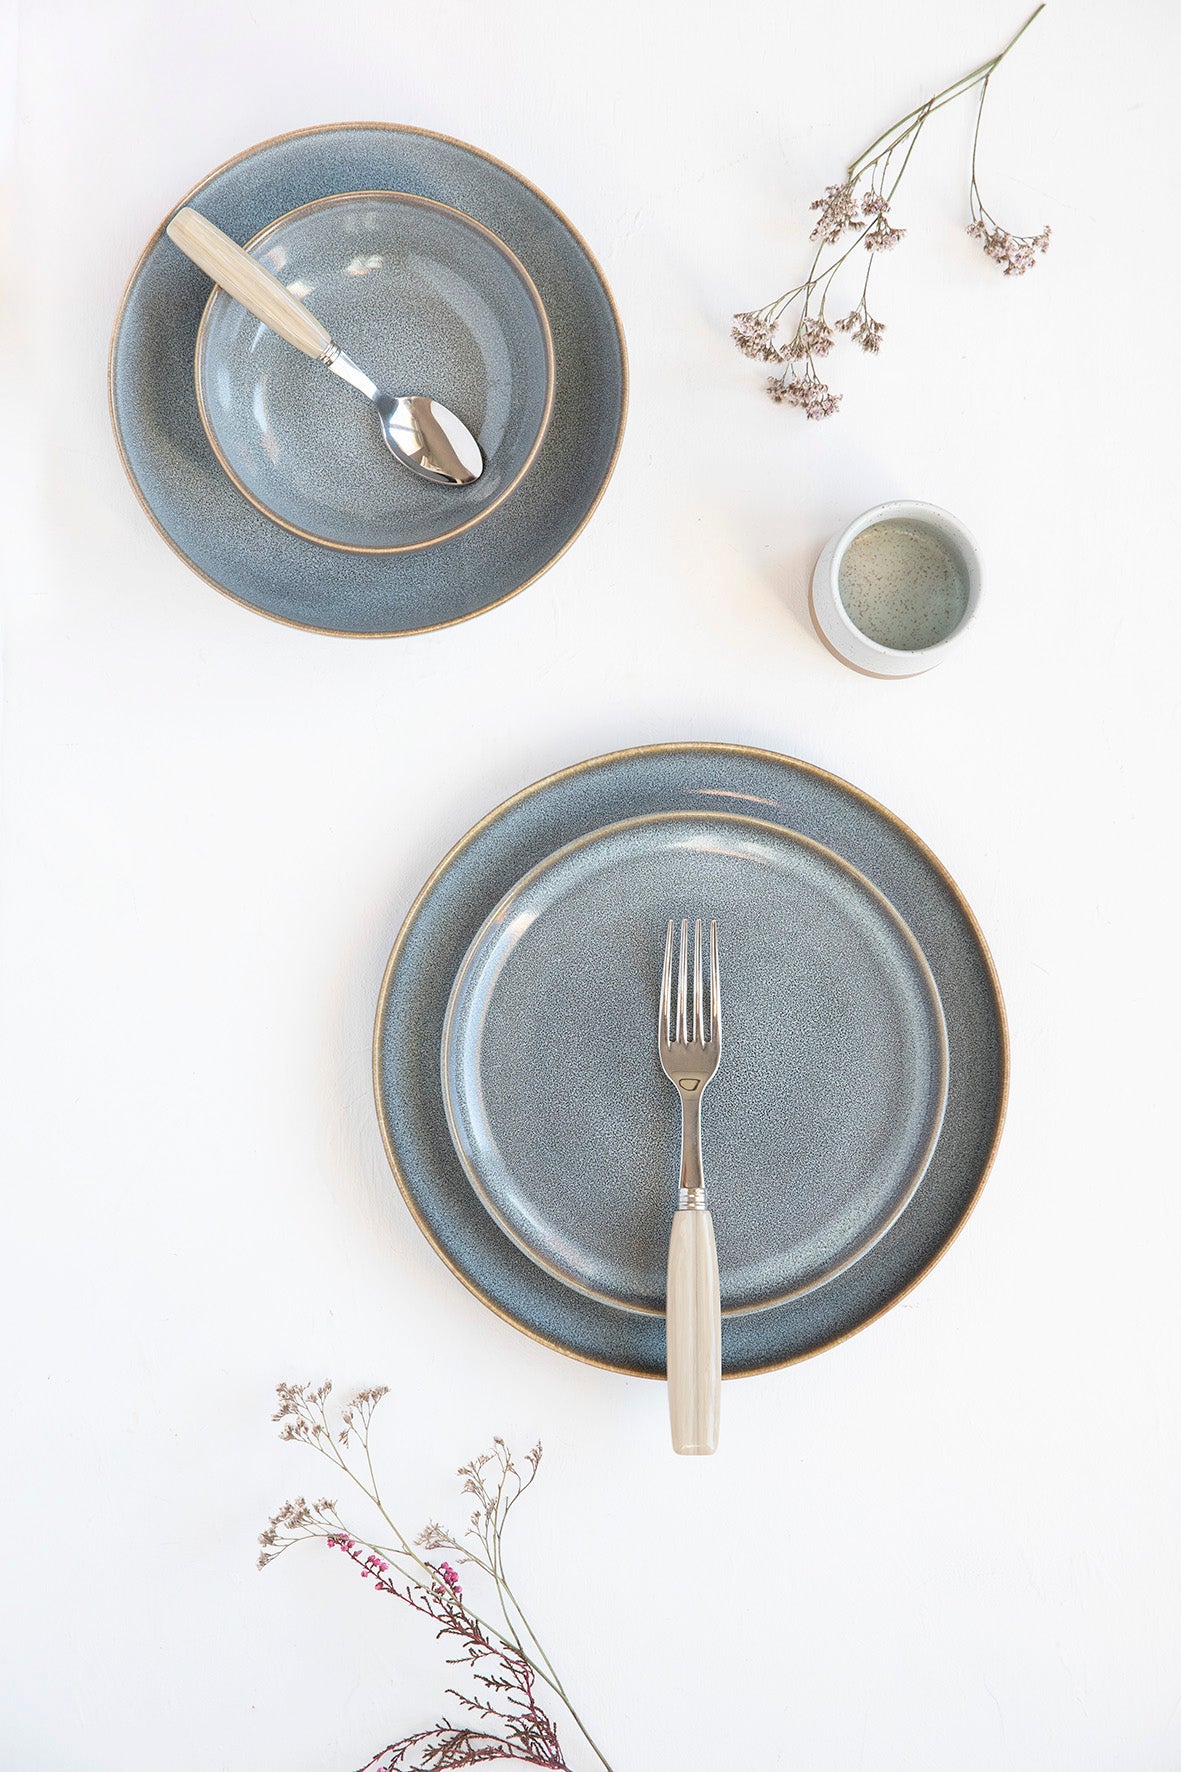 Saisons Denim tableware, new collection to start the year.